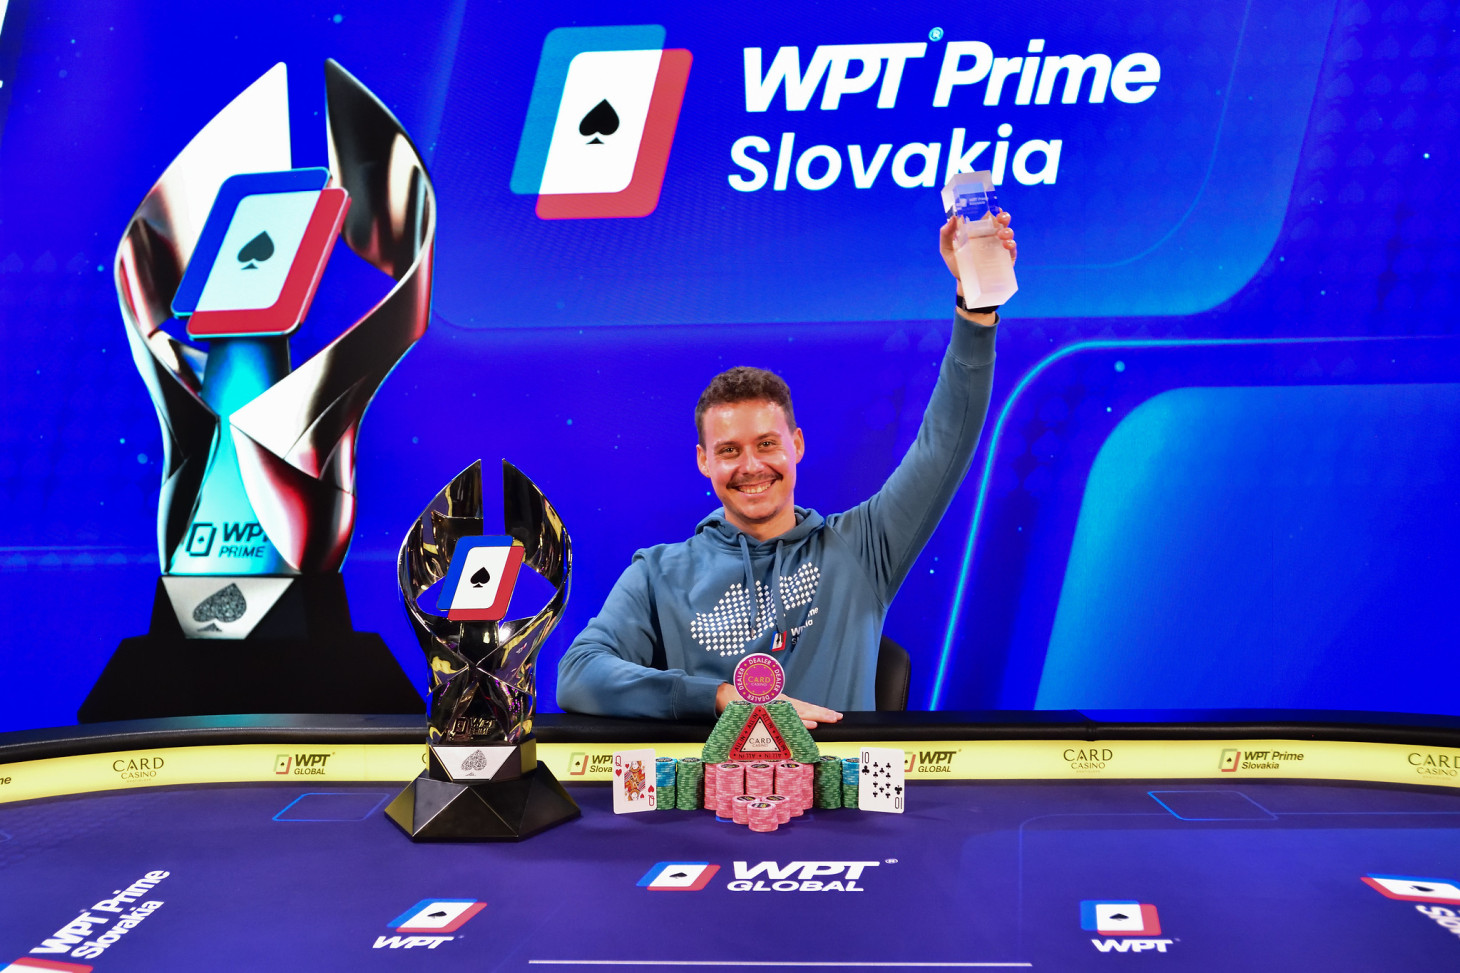 WPT Prime miraculously won by German Gumz, Cibicek third for €53,000. Who won the other tournaments?